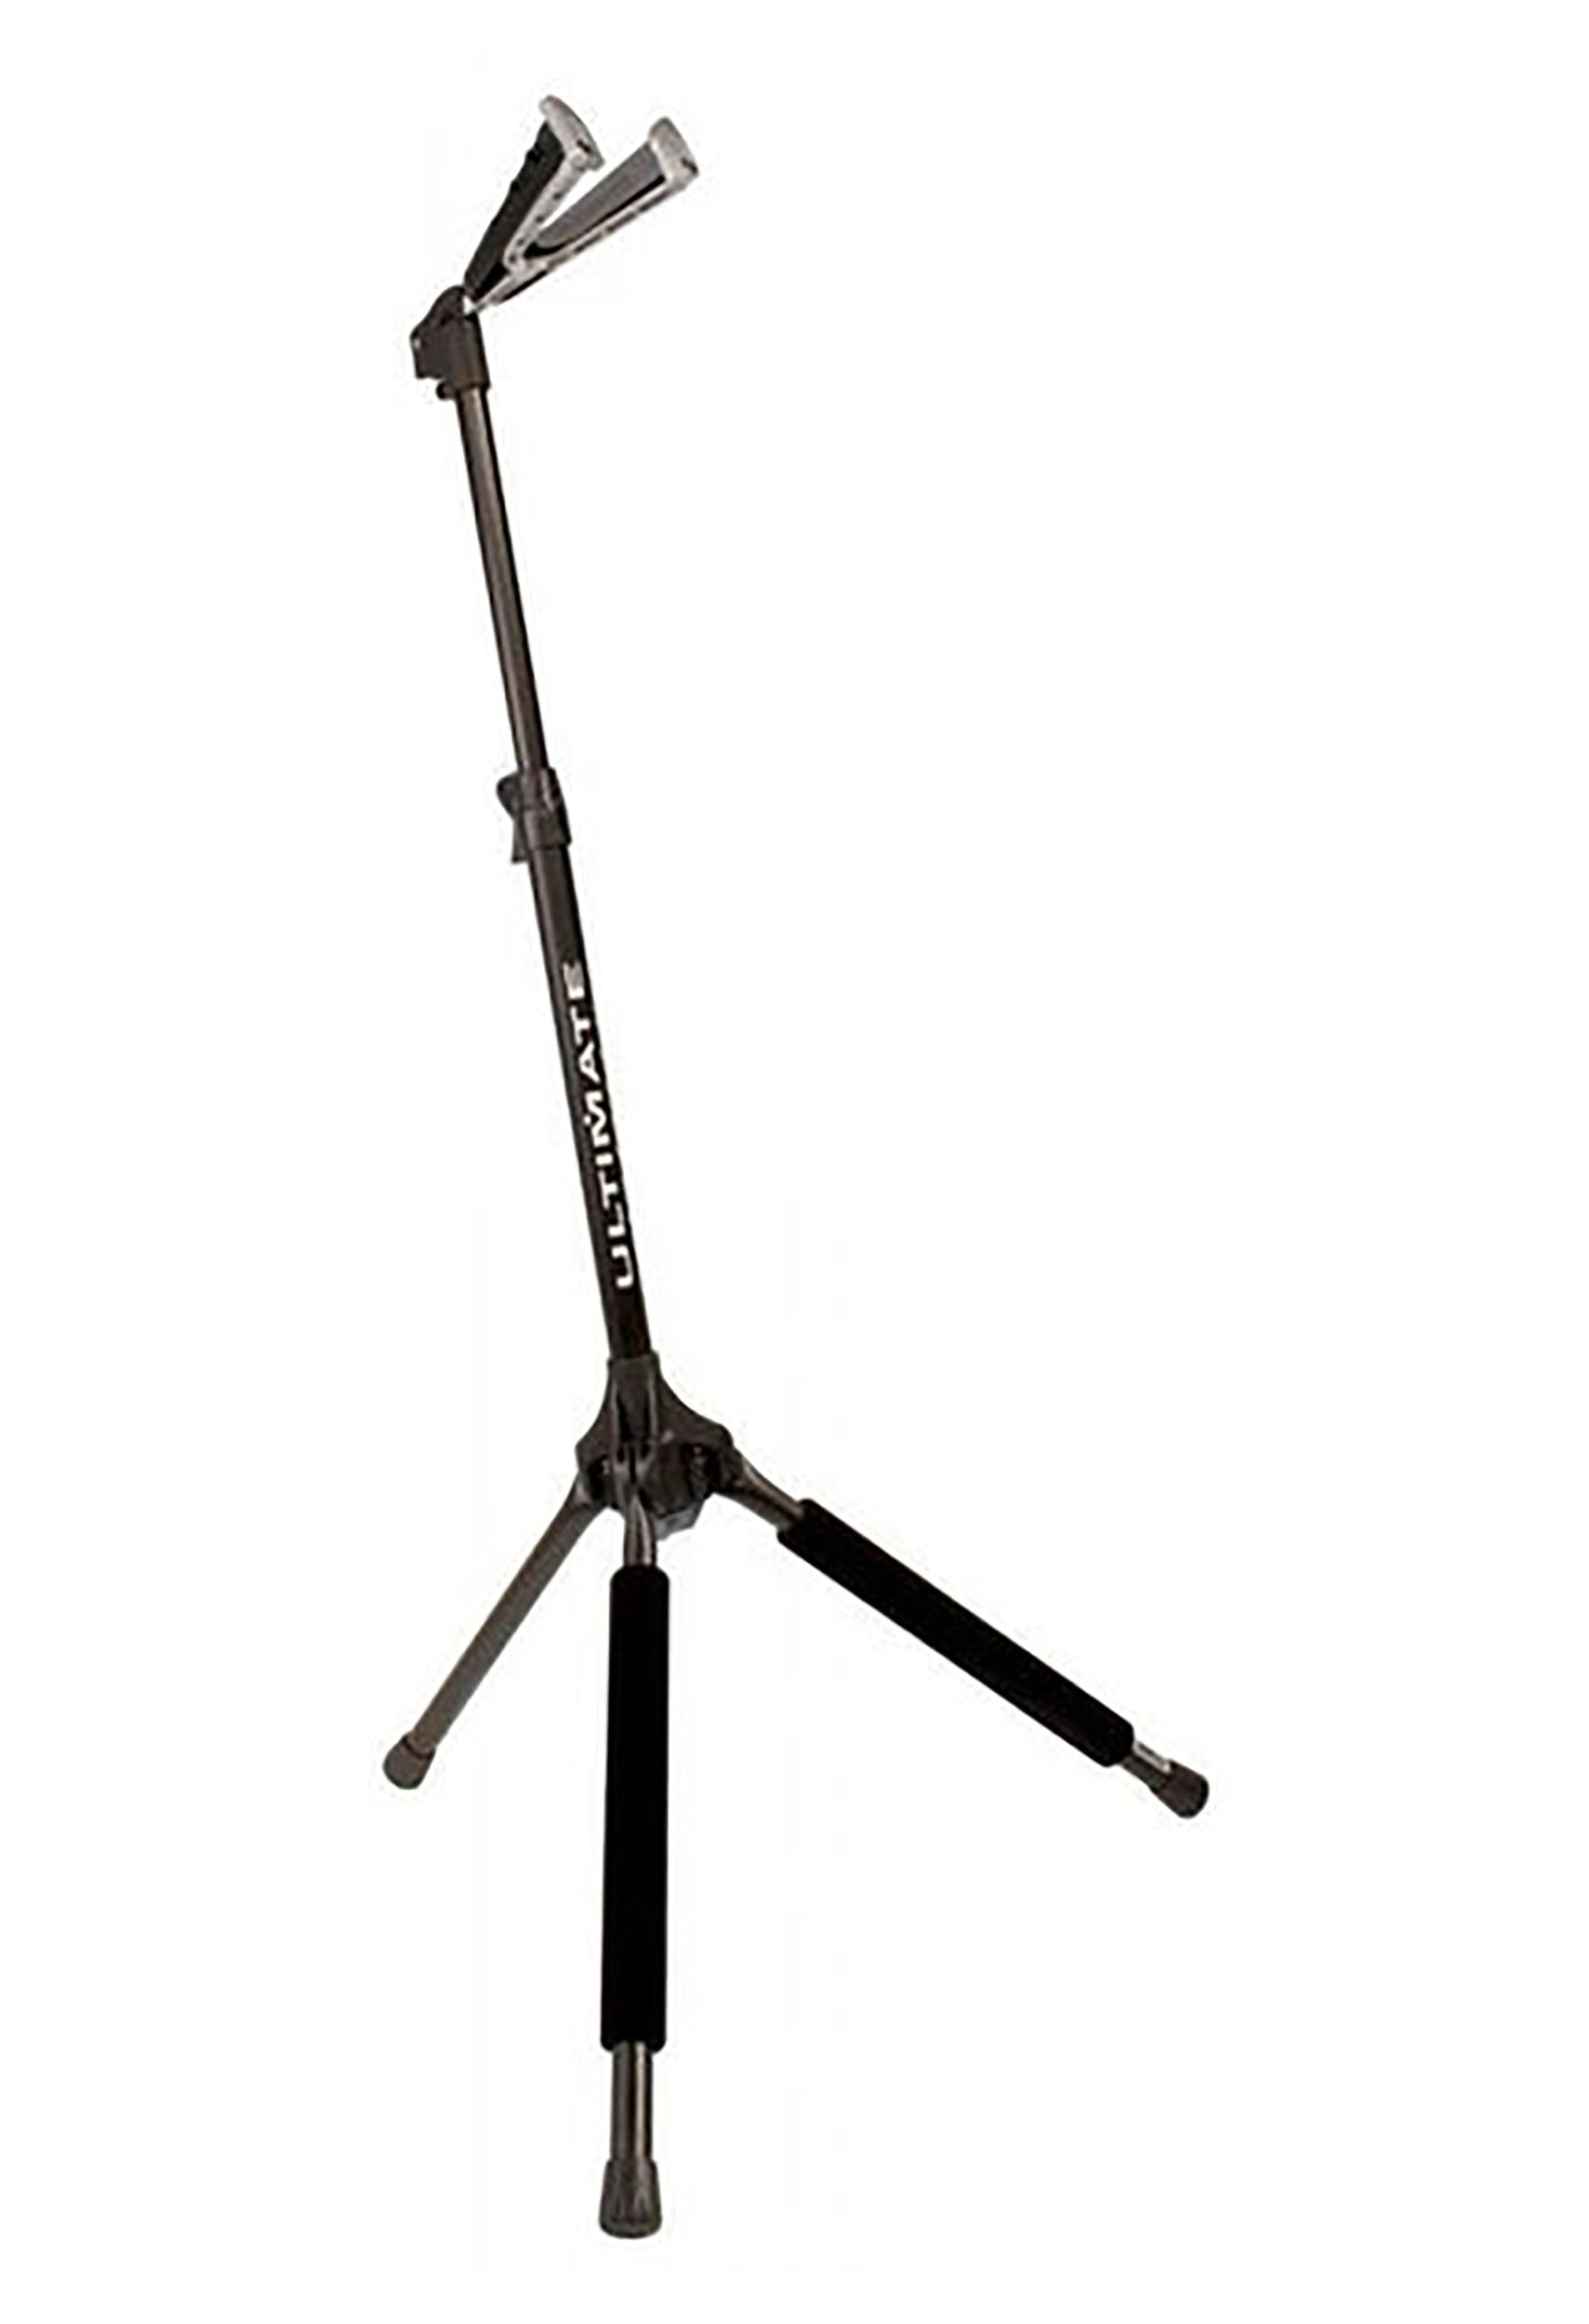 Ultimate Support GS-1000, Genesis Series Locking Leg/Yoke Guitar Stand by Ultimate Support